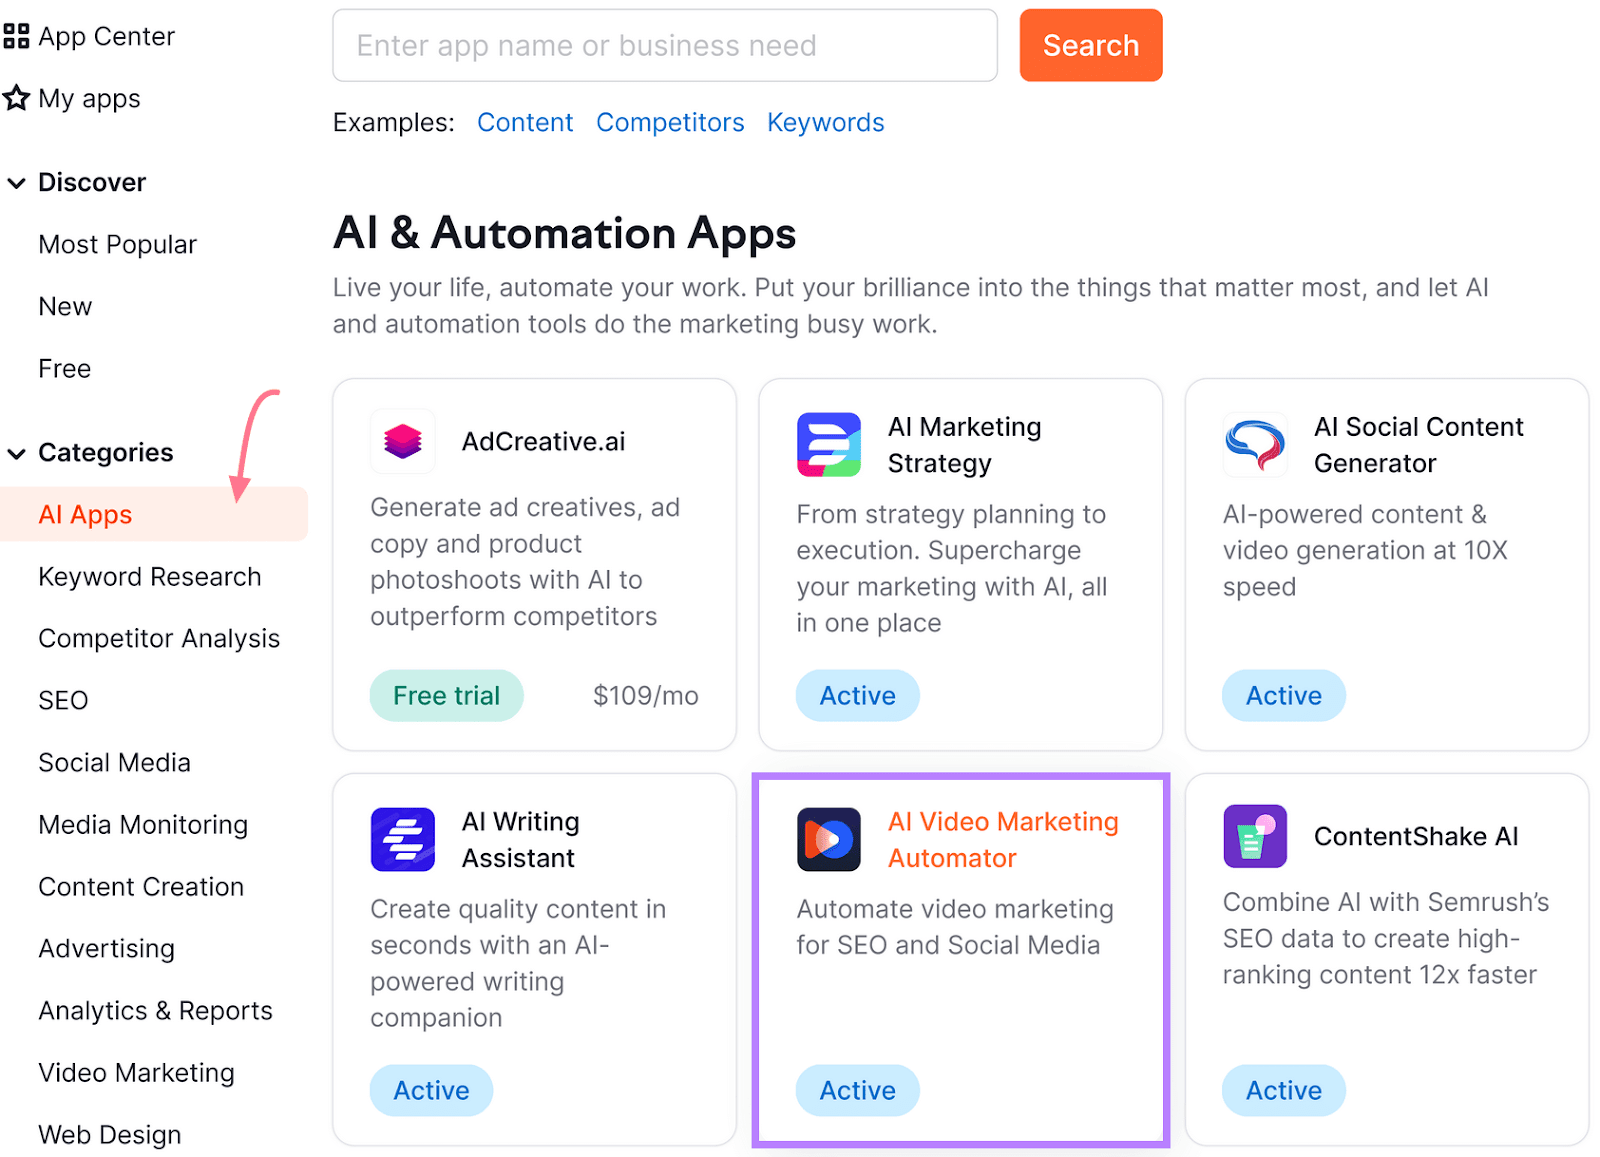 AI & Automation Apps section in the App Center with "AI Video Marketing Automator" highlighted in a purple box.